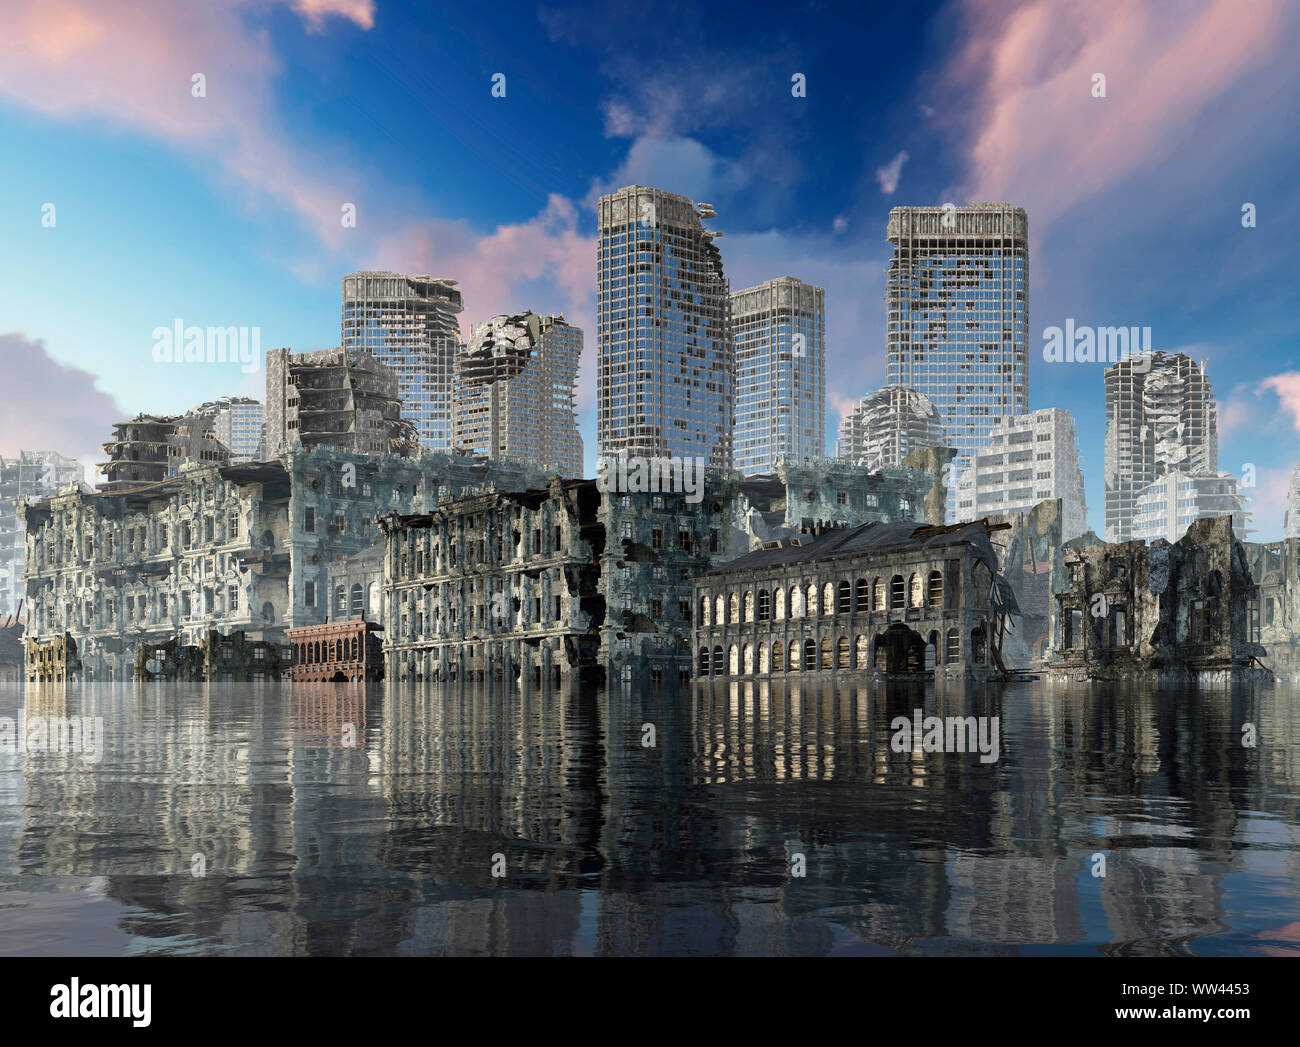 3D illustration global warming Ruins of a city apocalyptic landscape concept Stock Photo